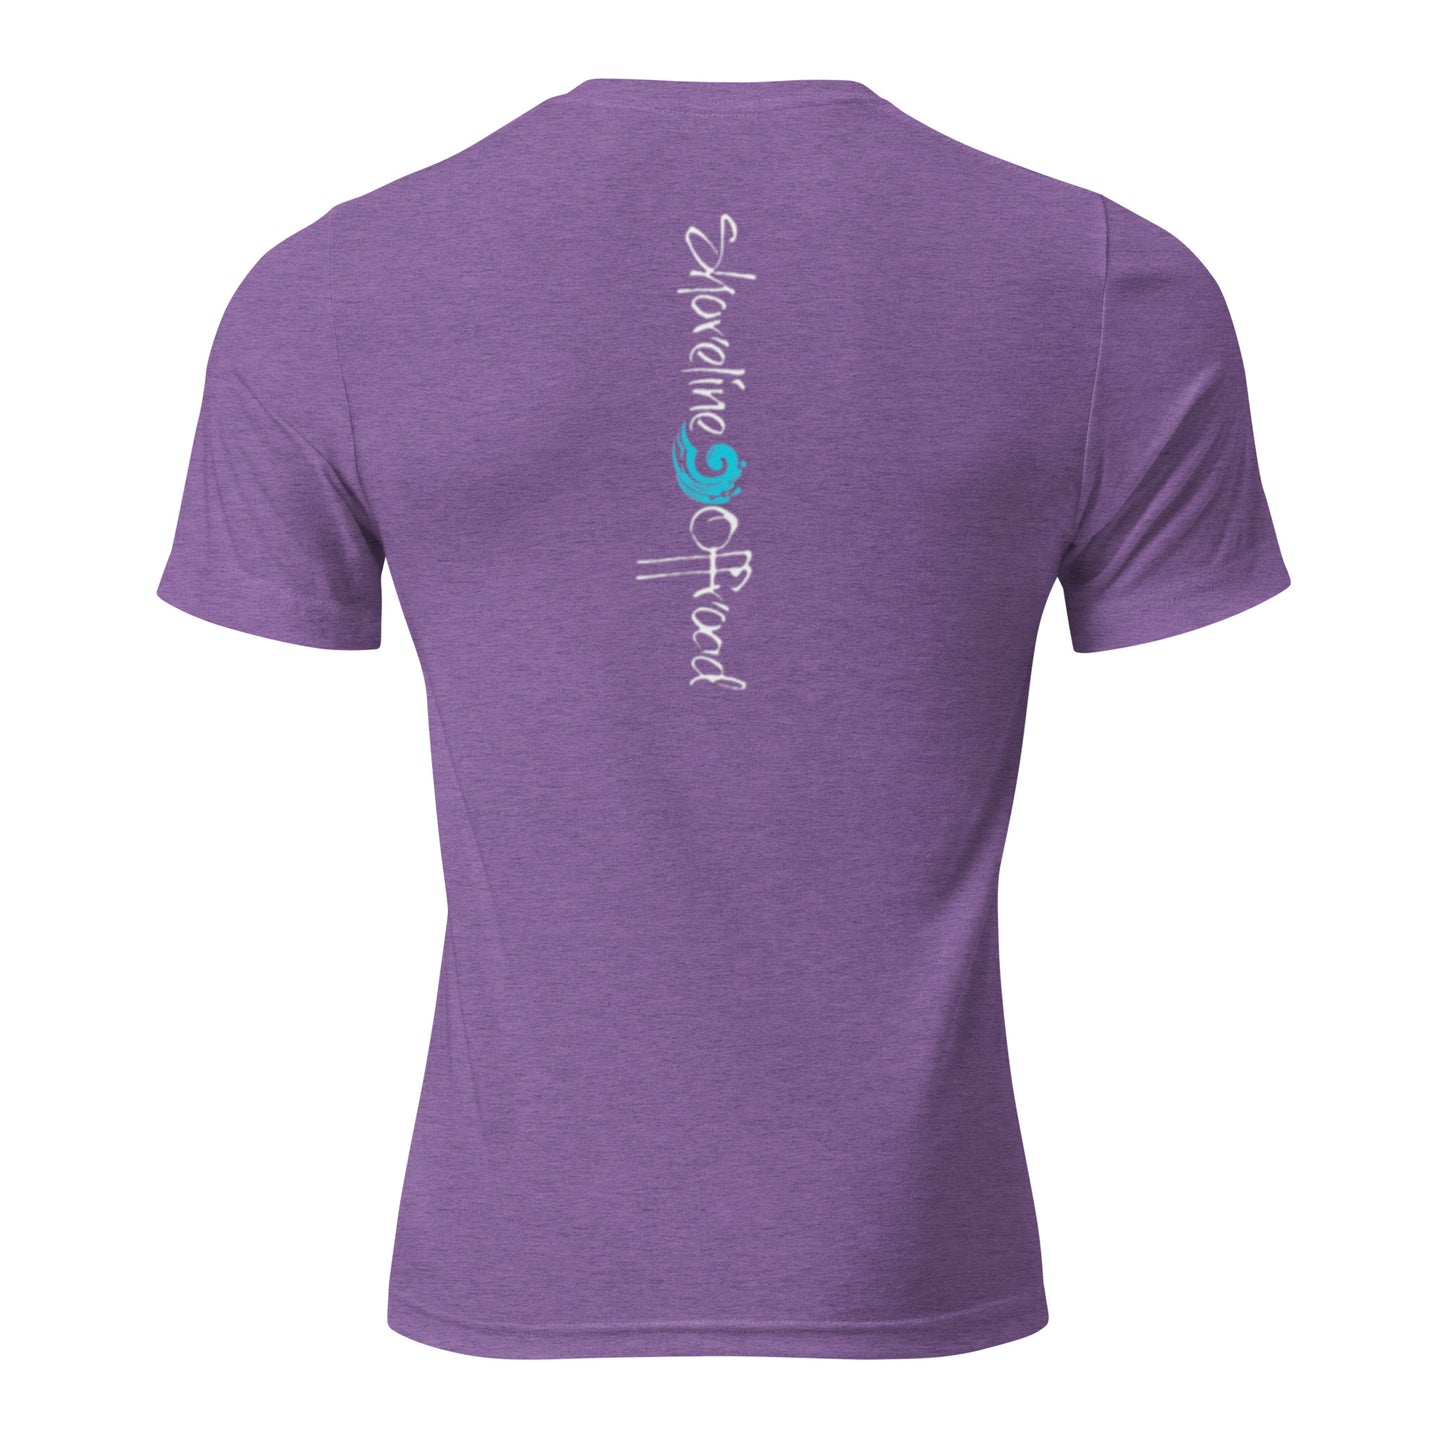 the back of a purple shirt with a blue and white logo on it